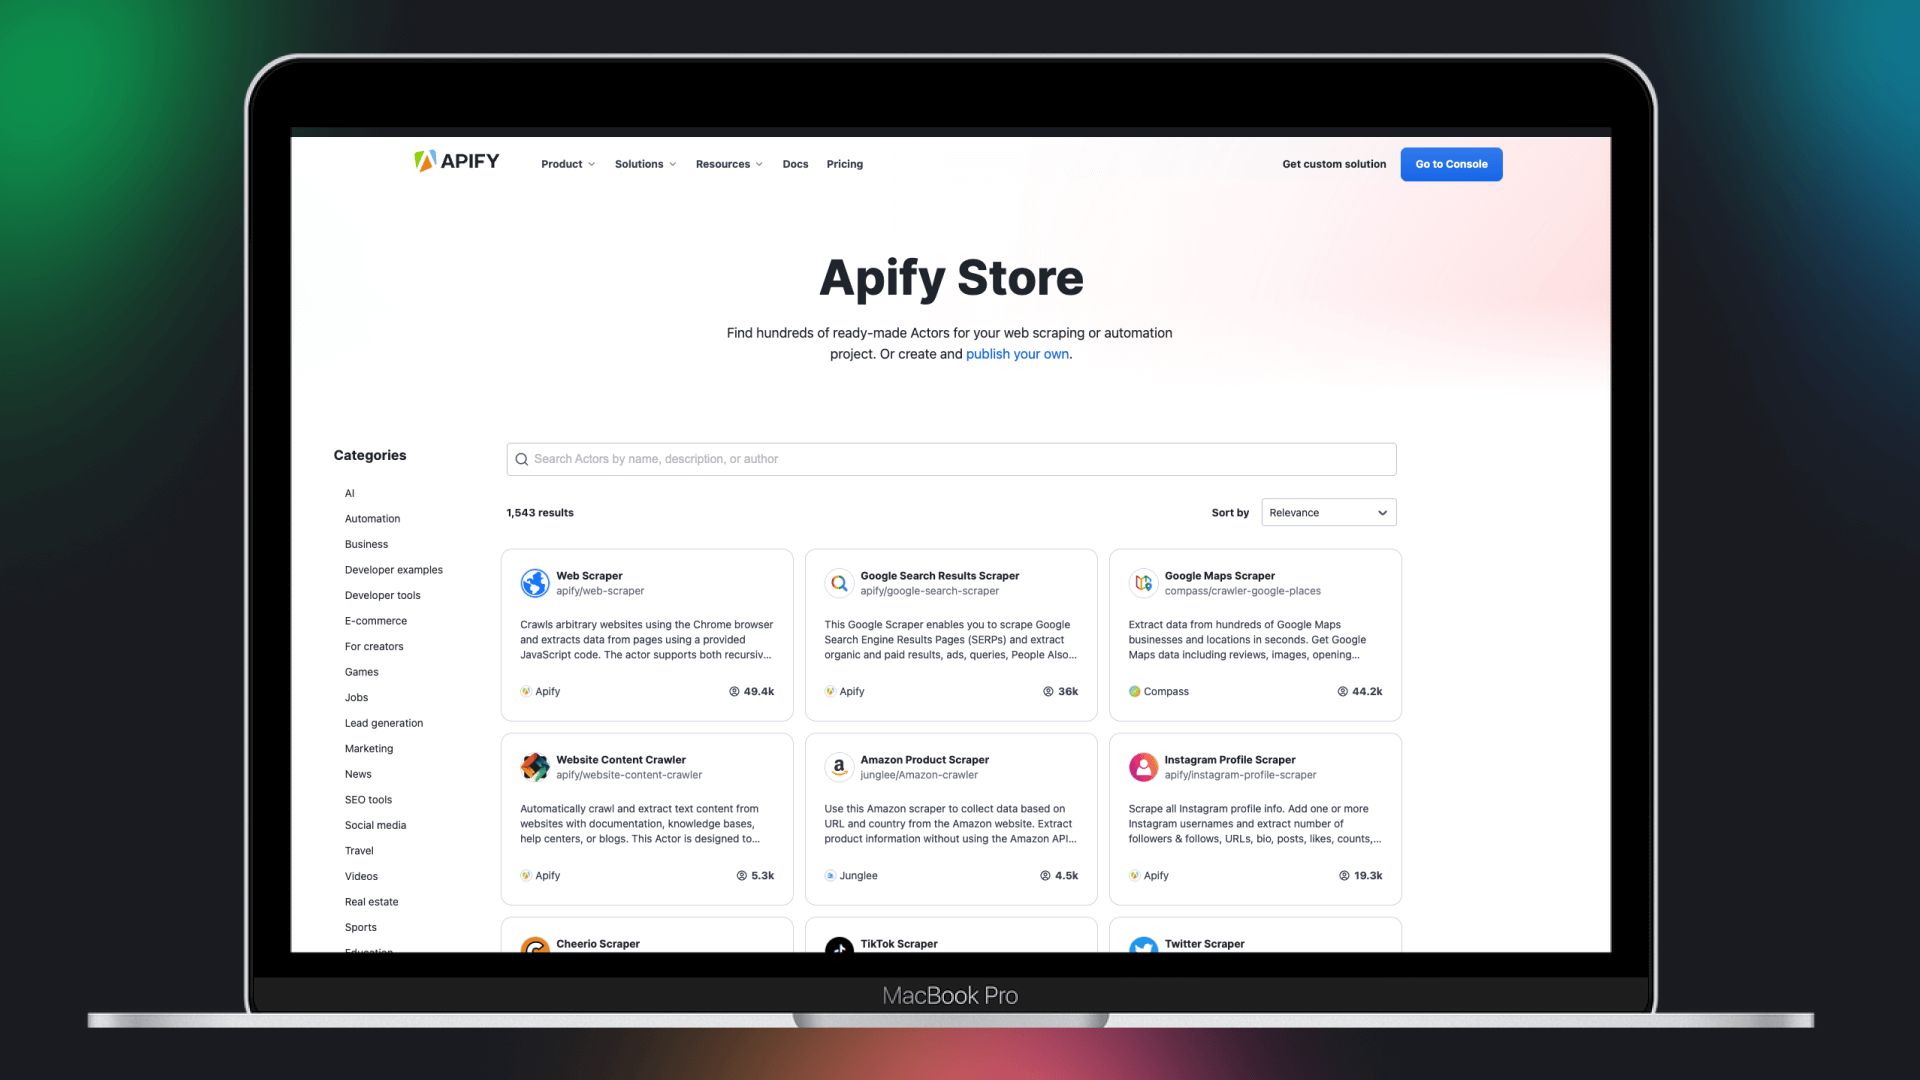 What is Apify Store?